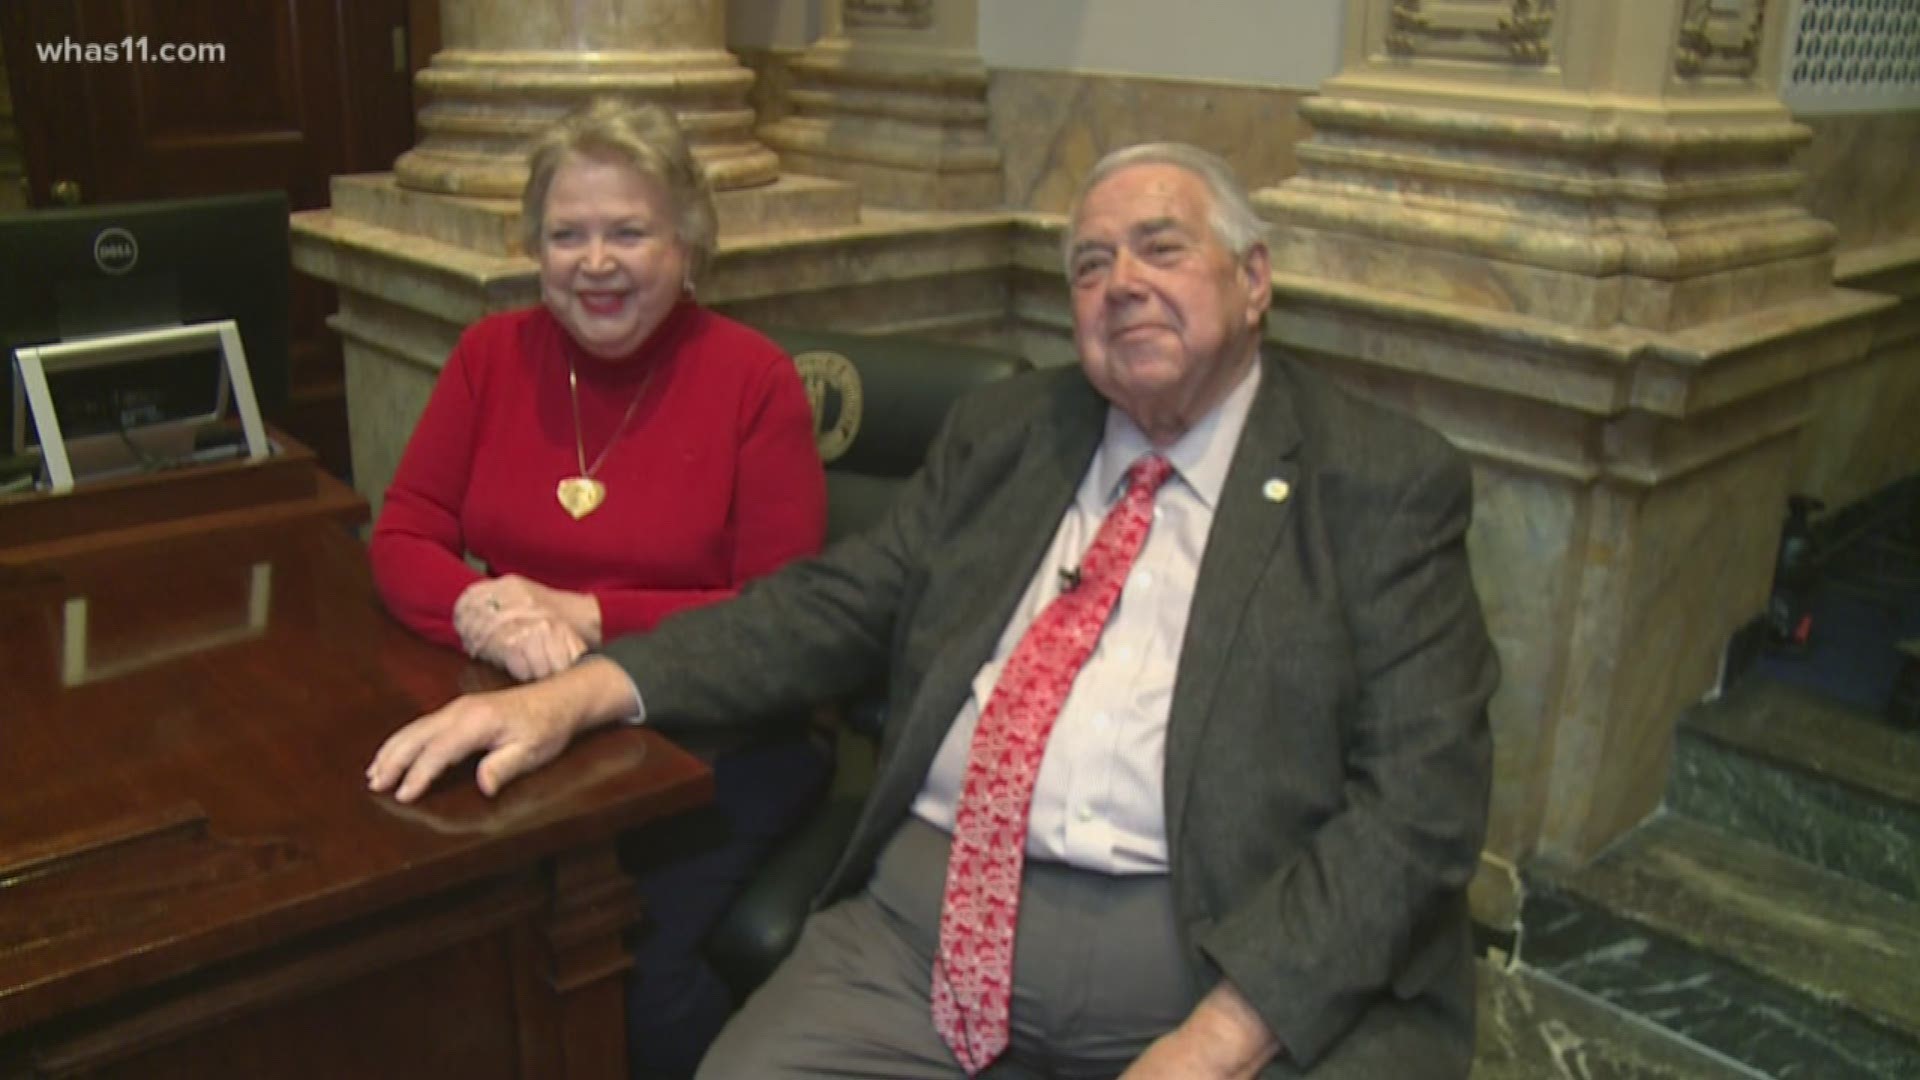 Barbara and S.K. Zimmerman work in the Kentucky Senate and prove that the opposite of “absence” makes the heart grow fonder, too.